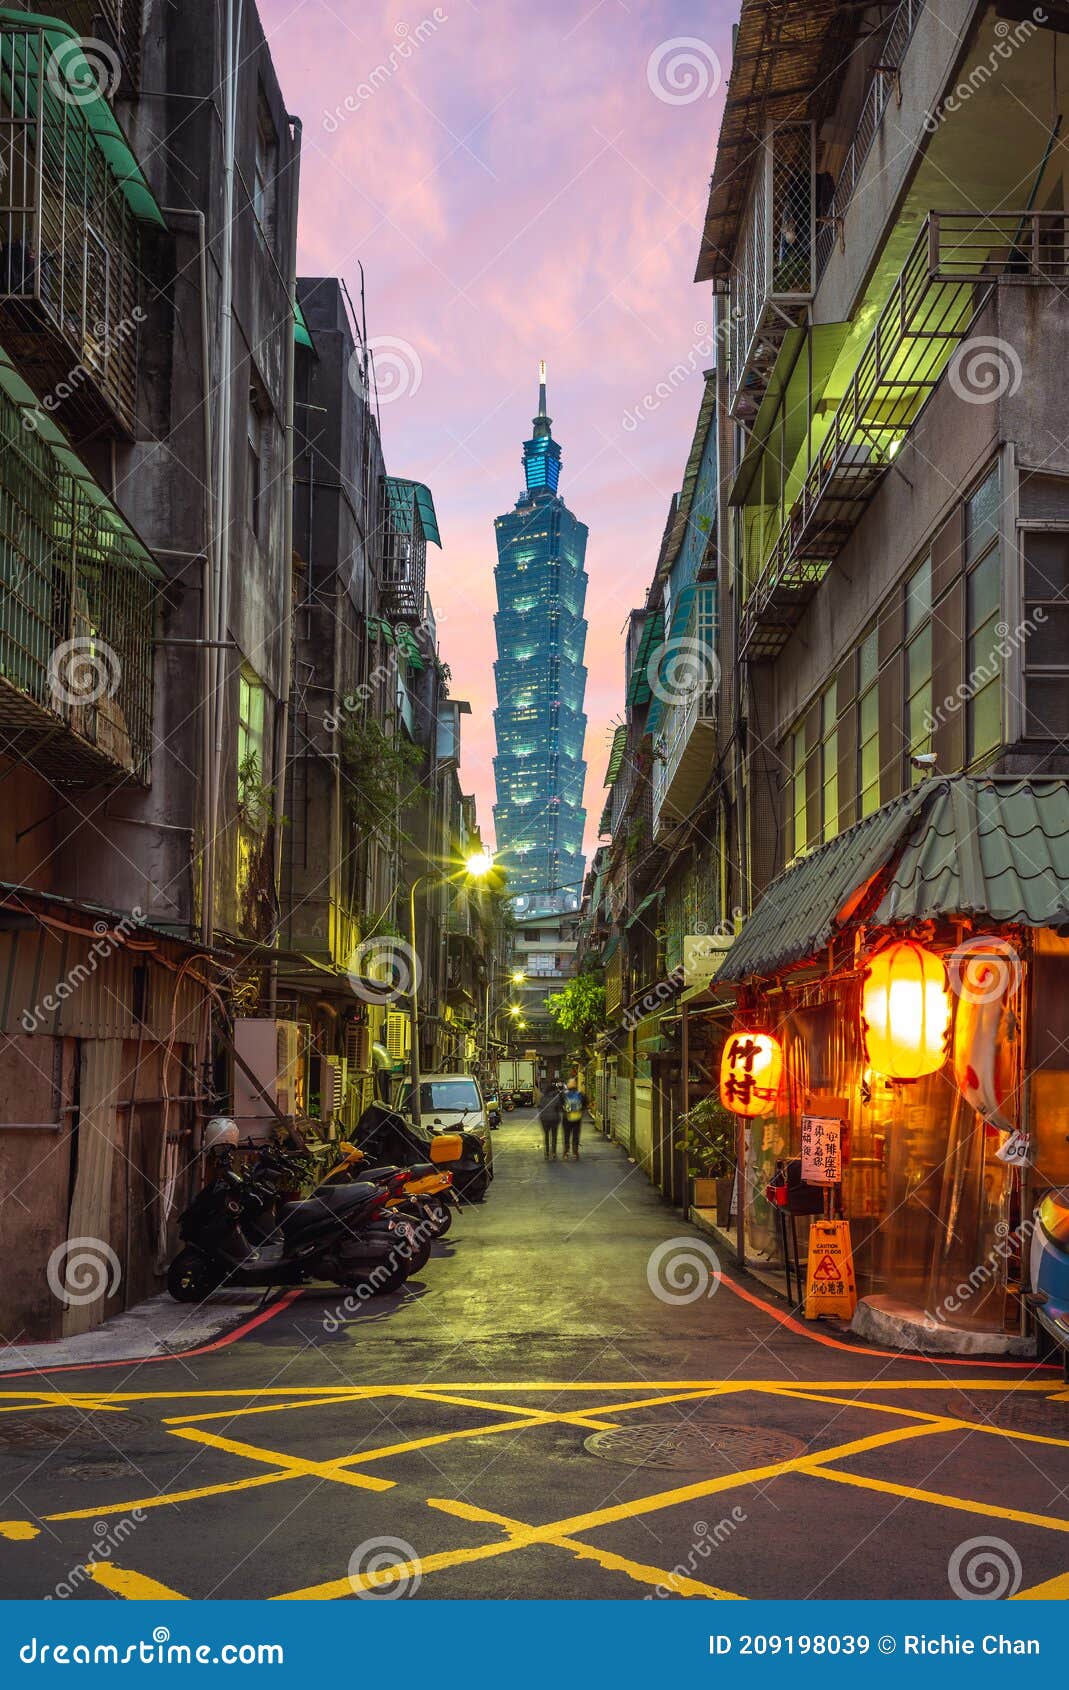 January 29 2021: Takemura Izakaya with taipei 101 tower as background. It is one of the hottest instagram spots located at Xinyi district taipei city taiwan due to a popular taiwanese tv drama